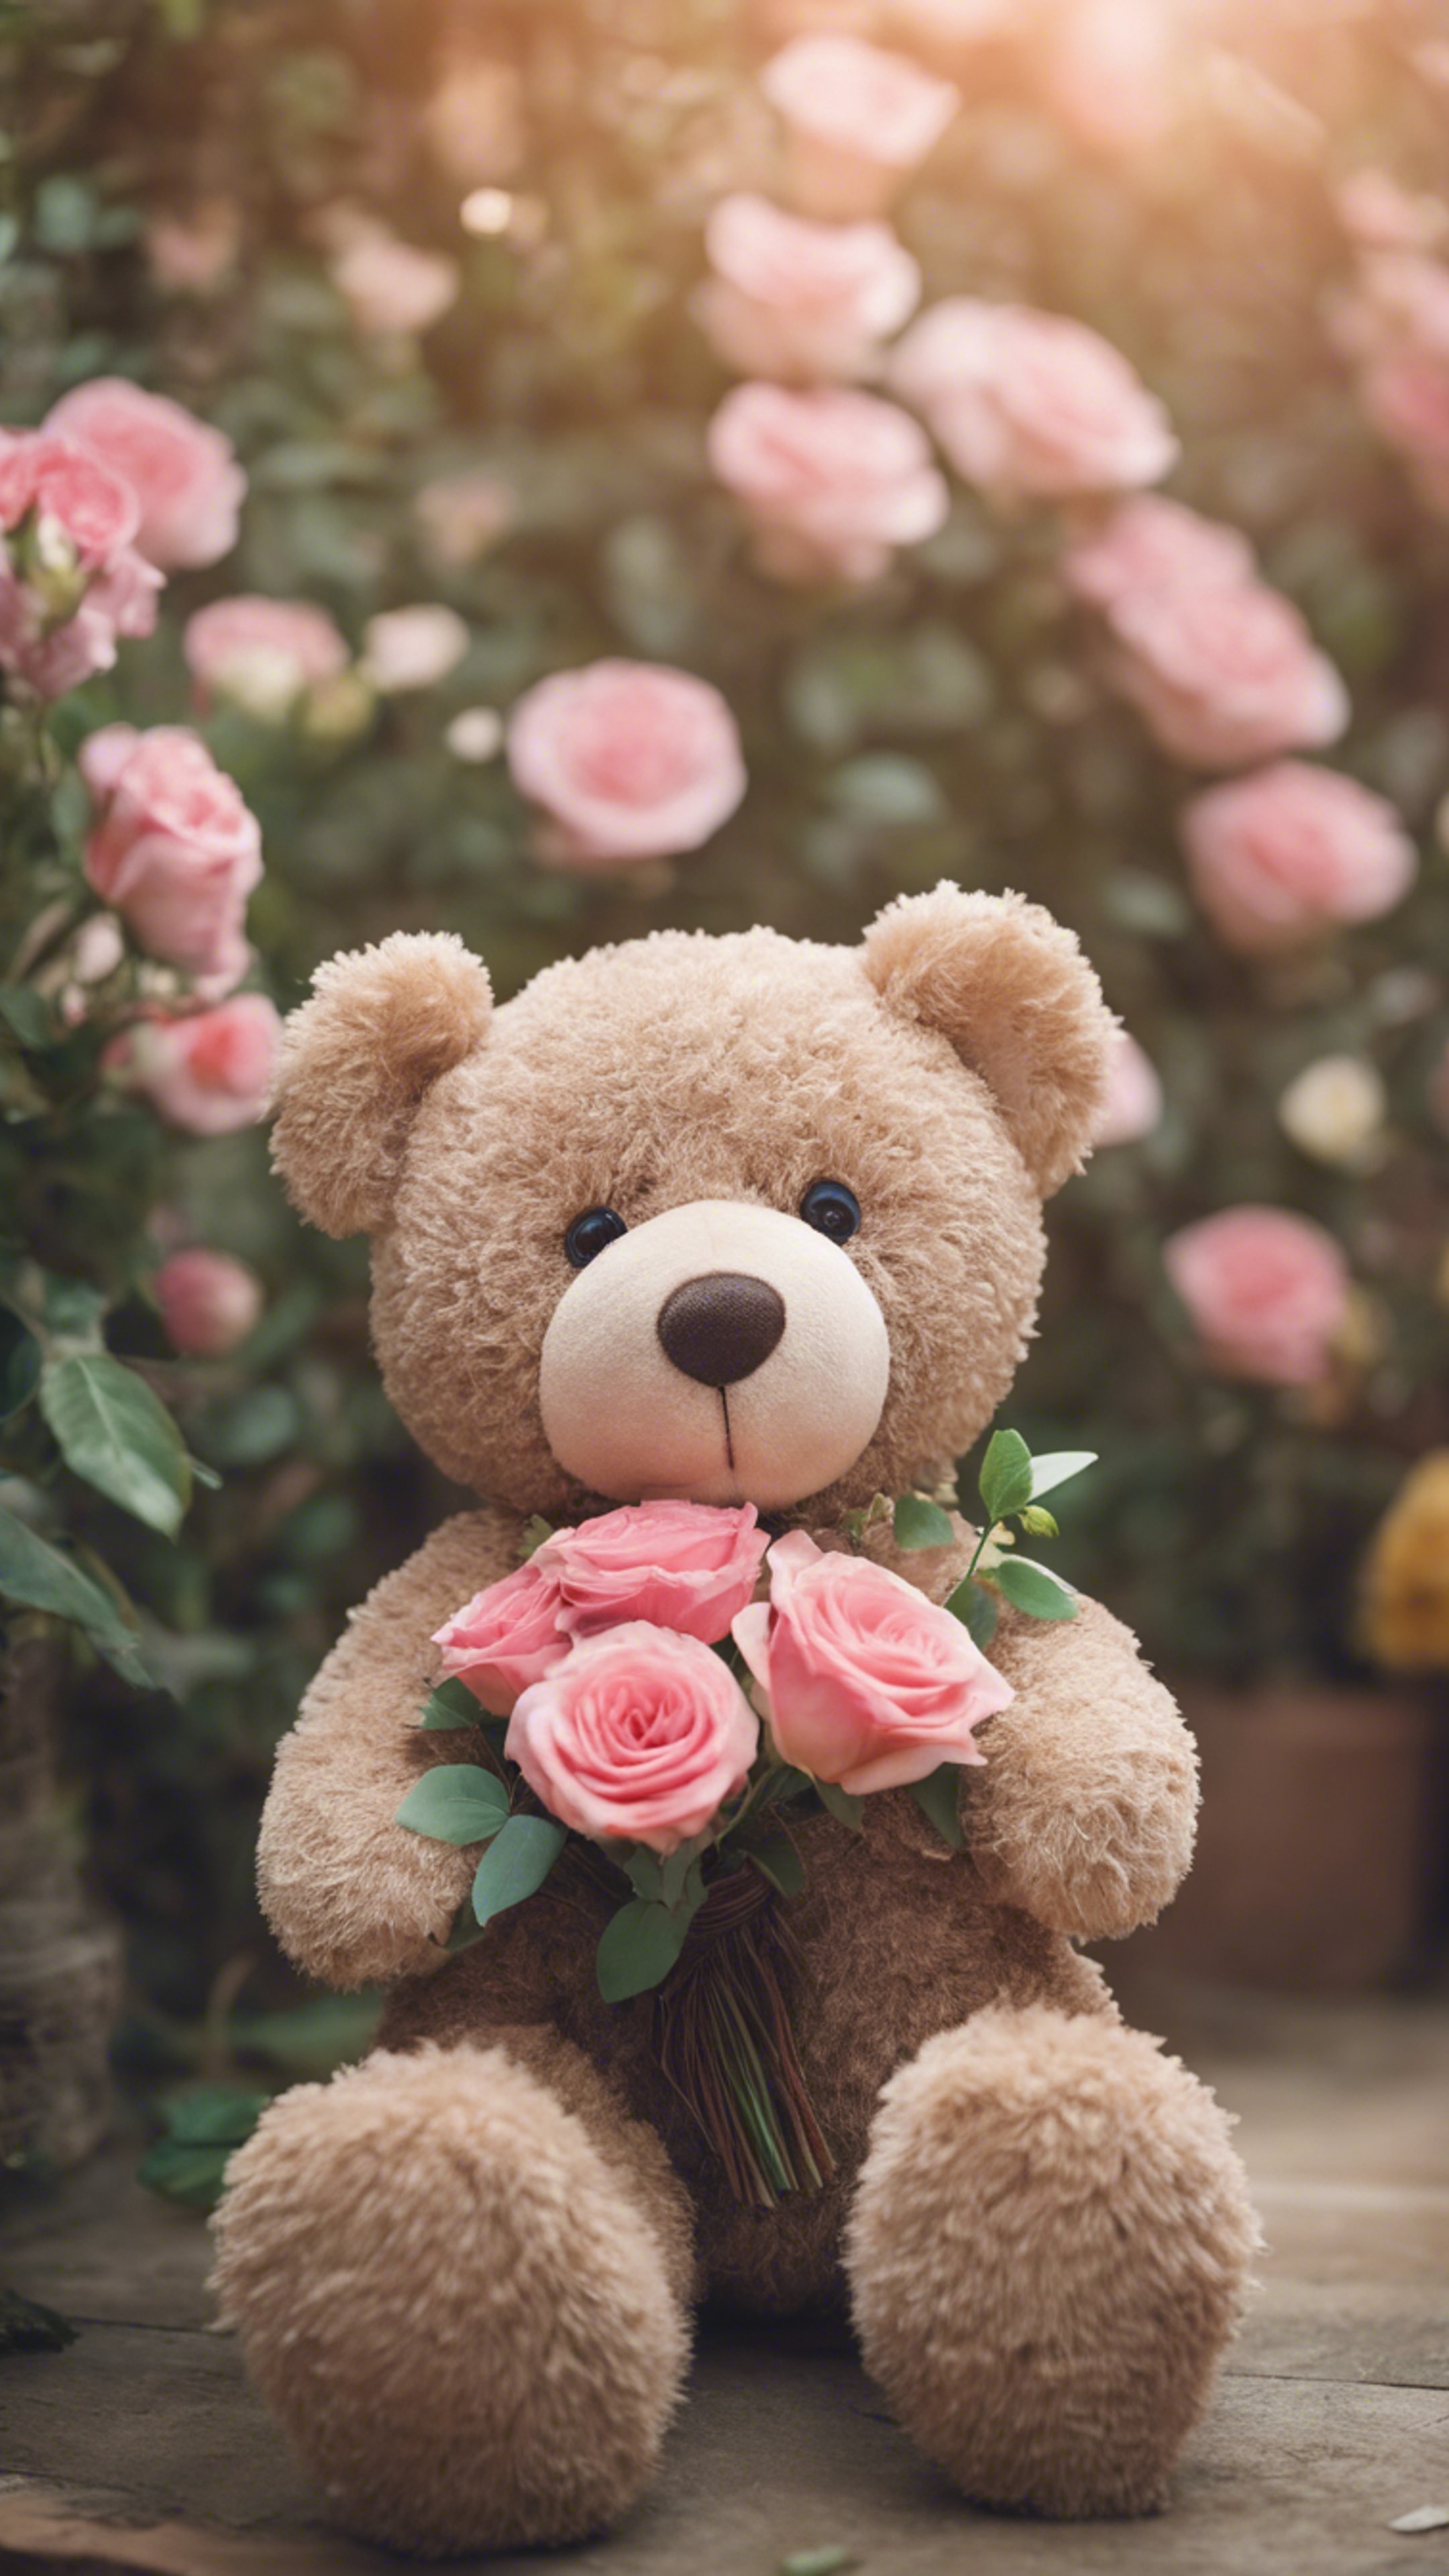 A teddy bear in a romantic setting, holding a bouquet of roses. Tapeta[0c0a94ba405548b0bff3]